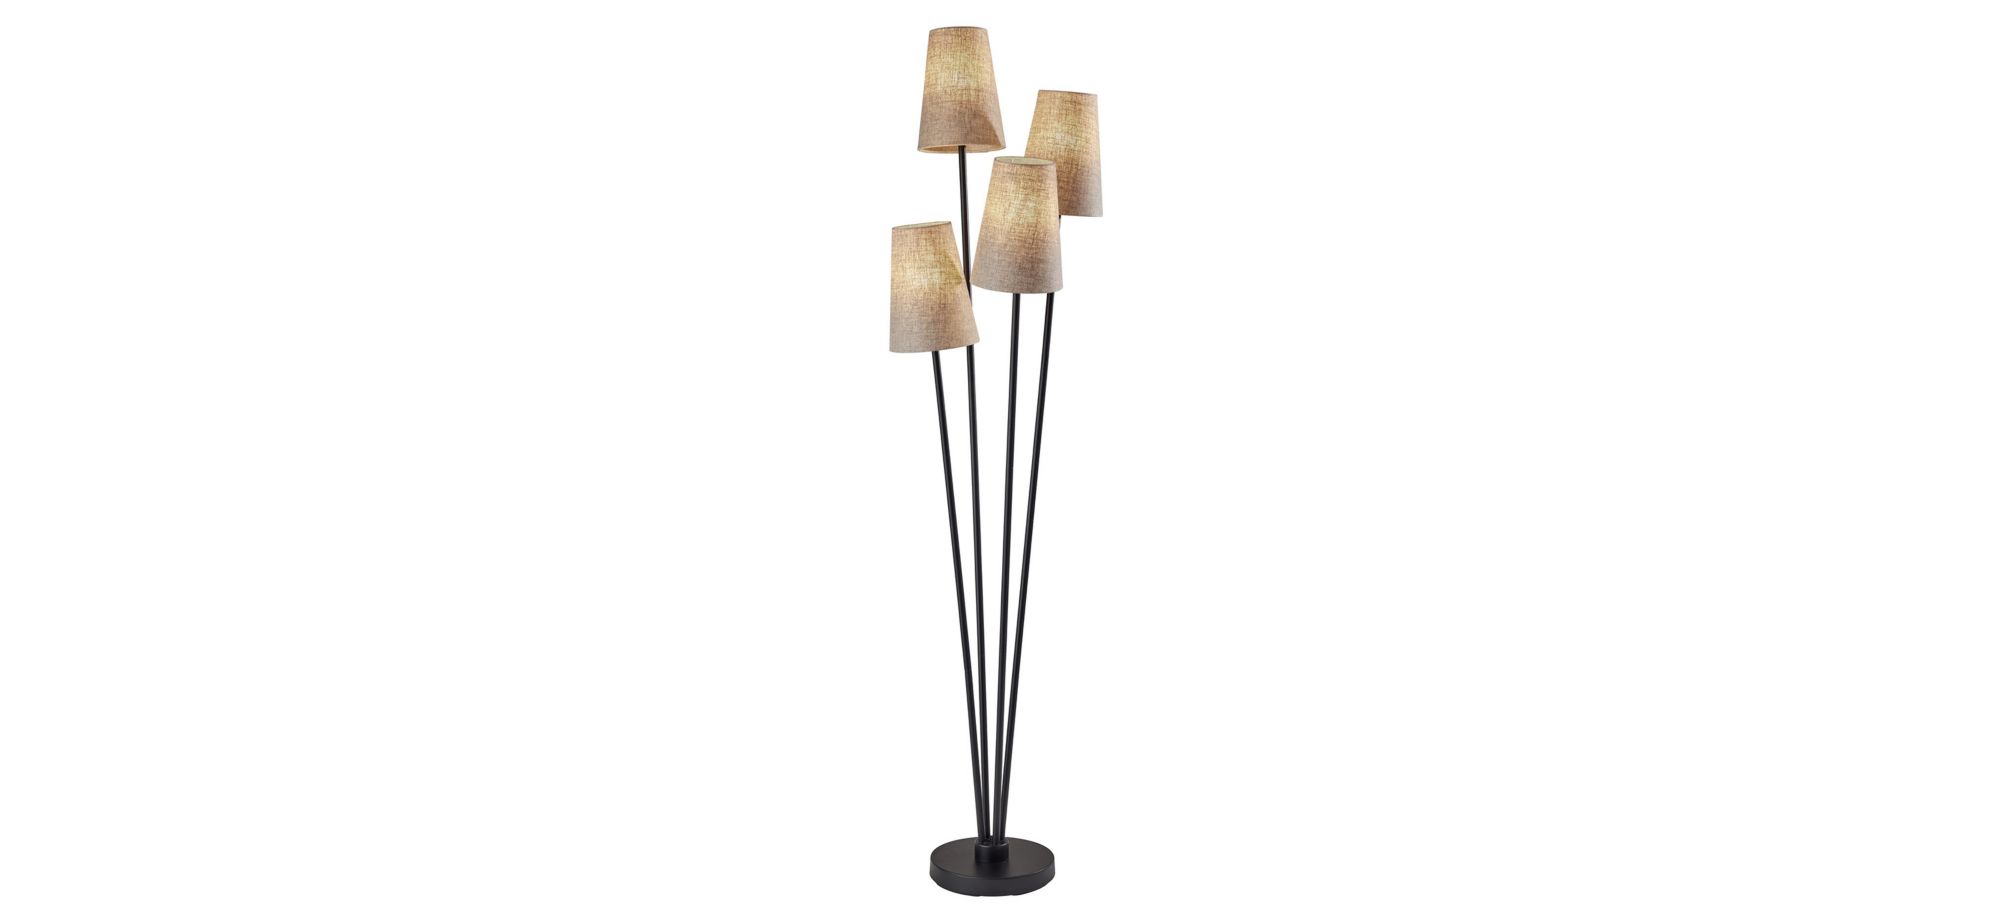 Wentworth Floor Lamp in Black with Natural Shade by Adesso Inc